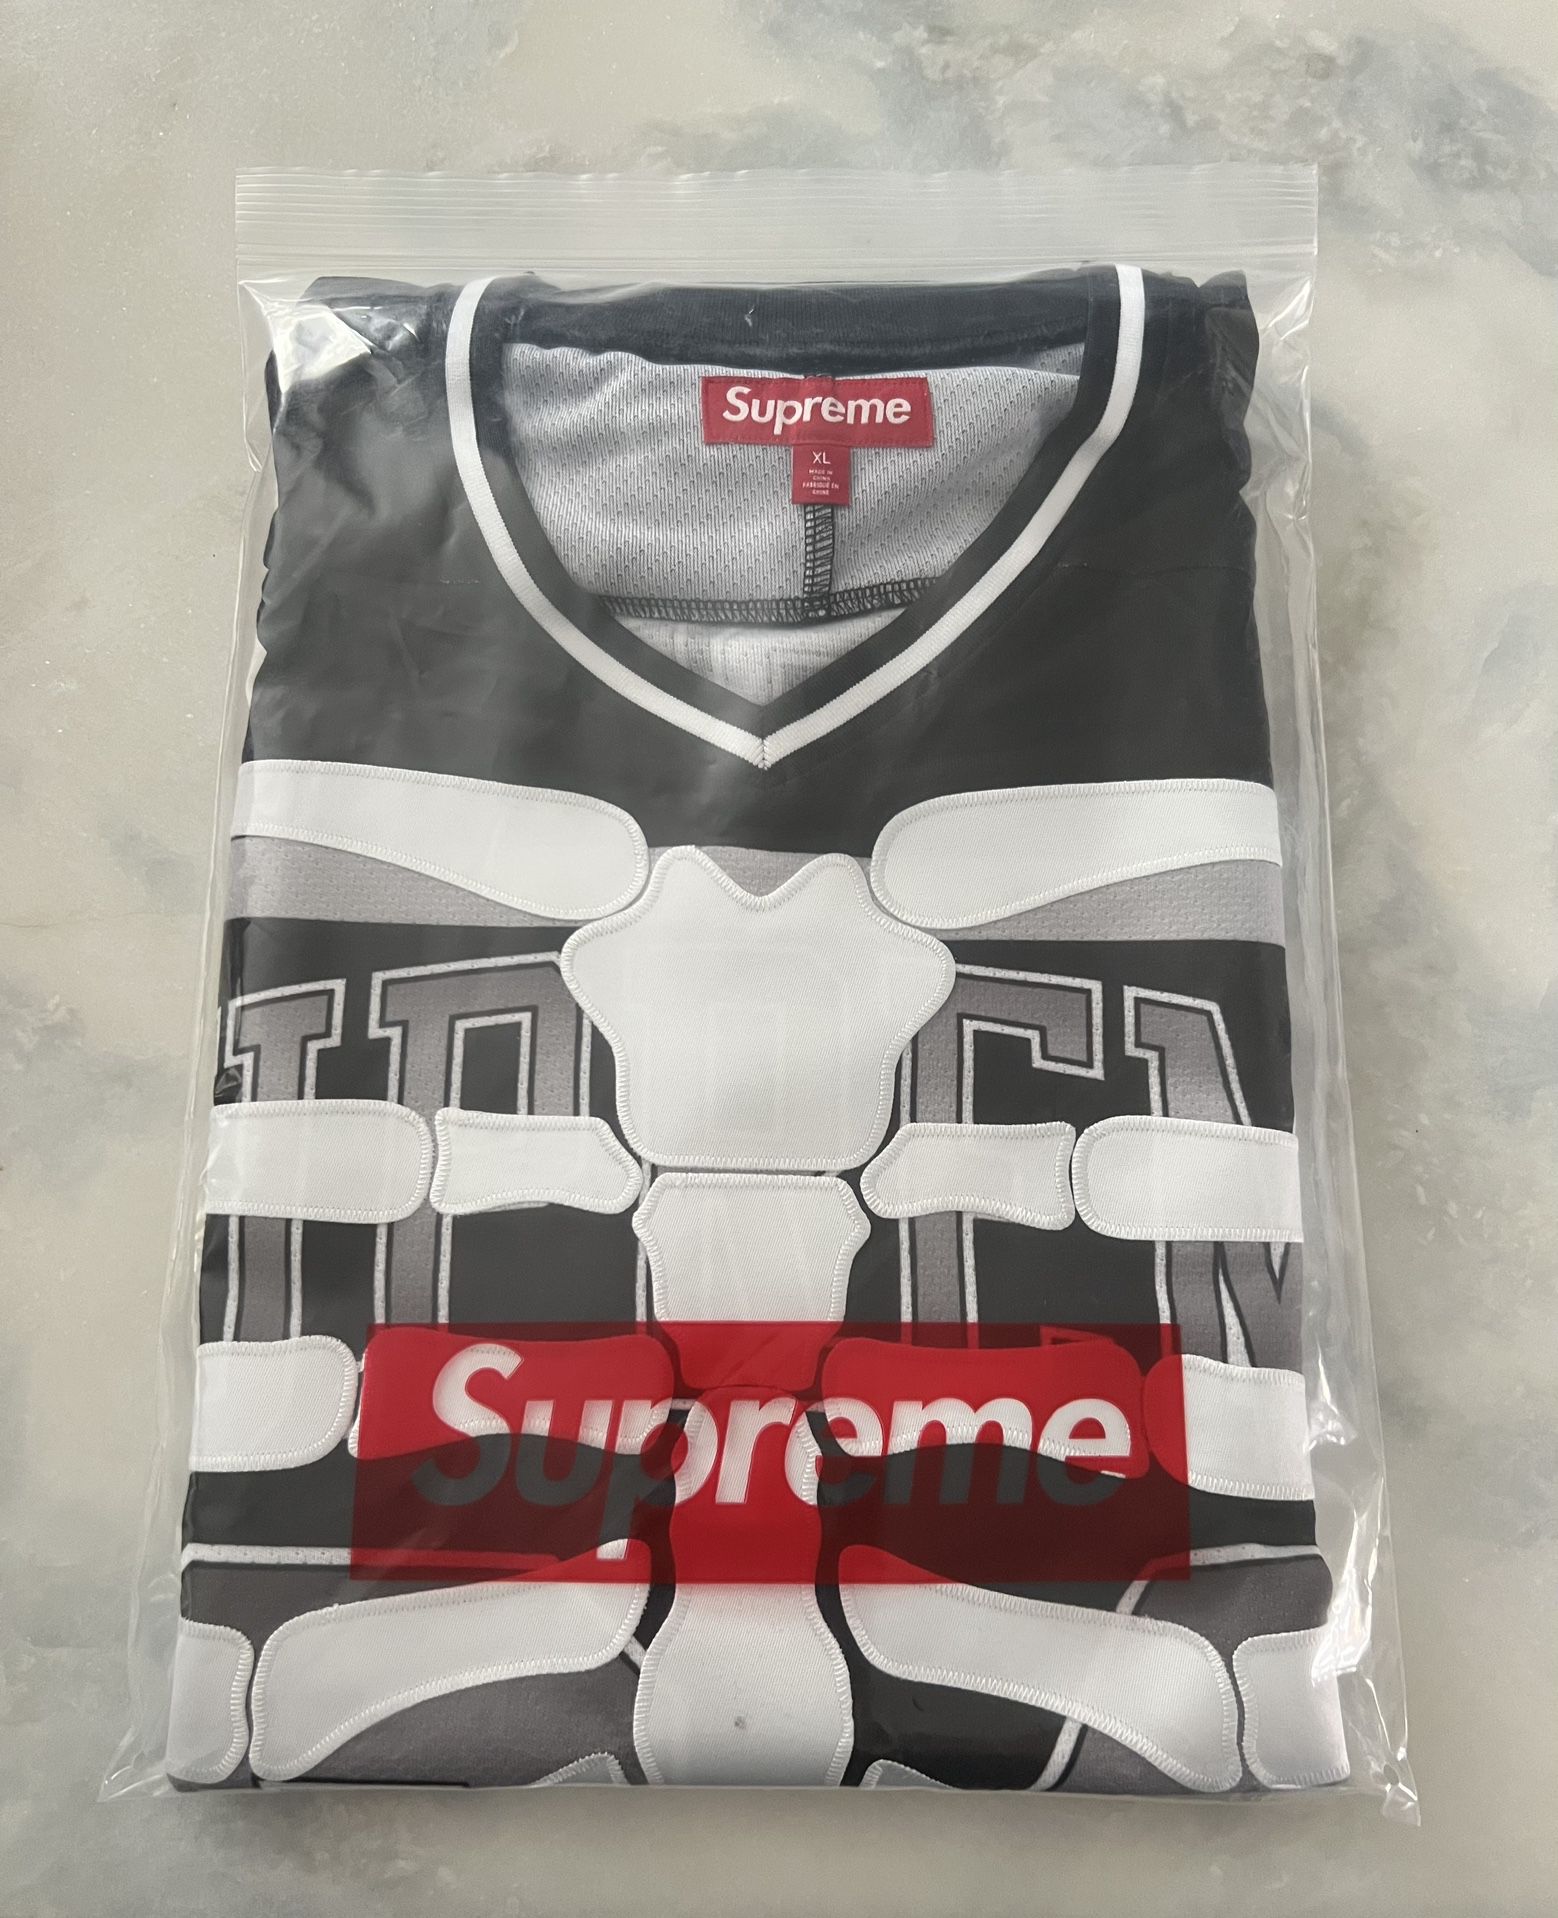 Supreme Skeleton Hockey Jersey for Sale in San Leandro, CA - OfferUp